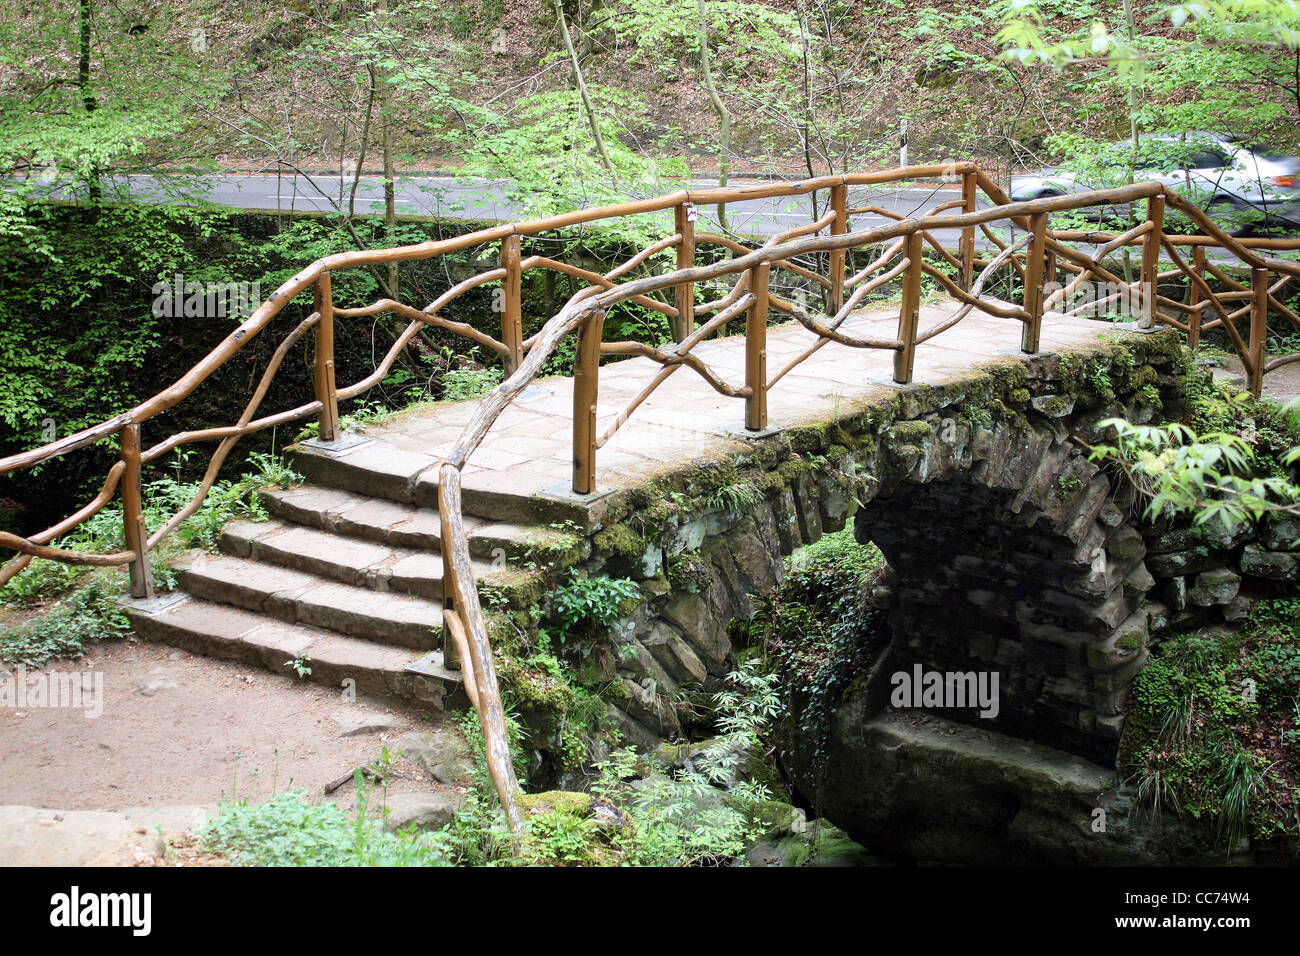 Bridge of the tourist in the nature 'Mullerthal'in Luxembourg Stock Photo